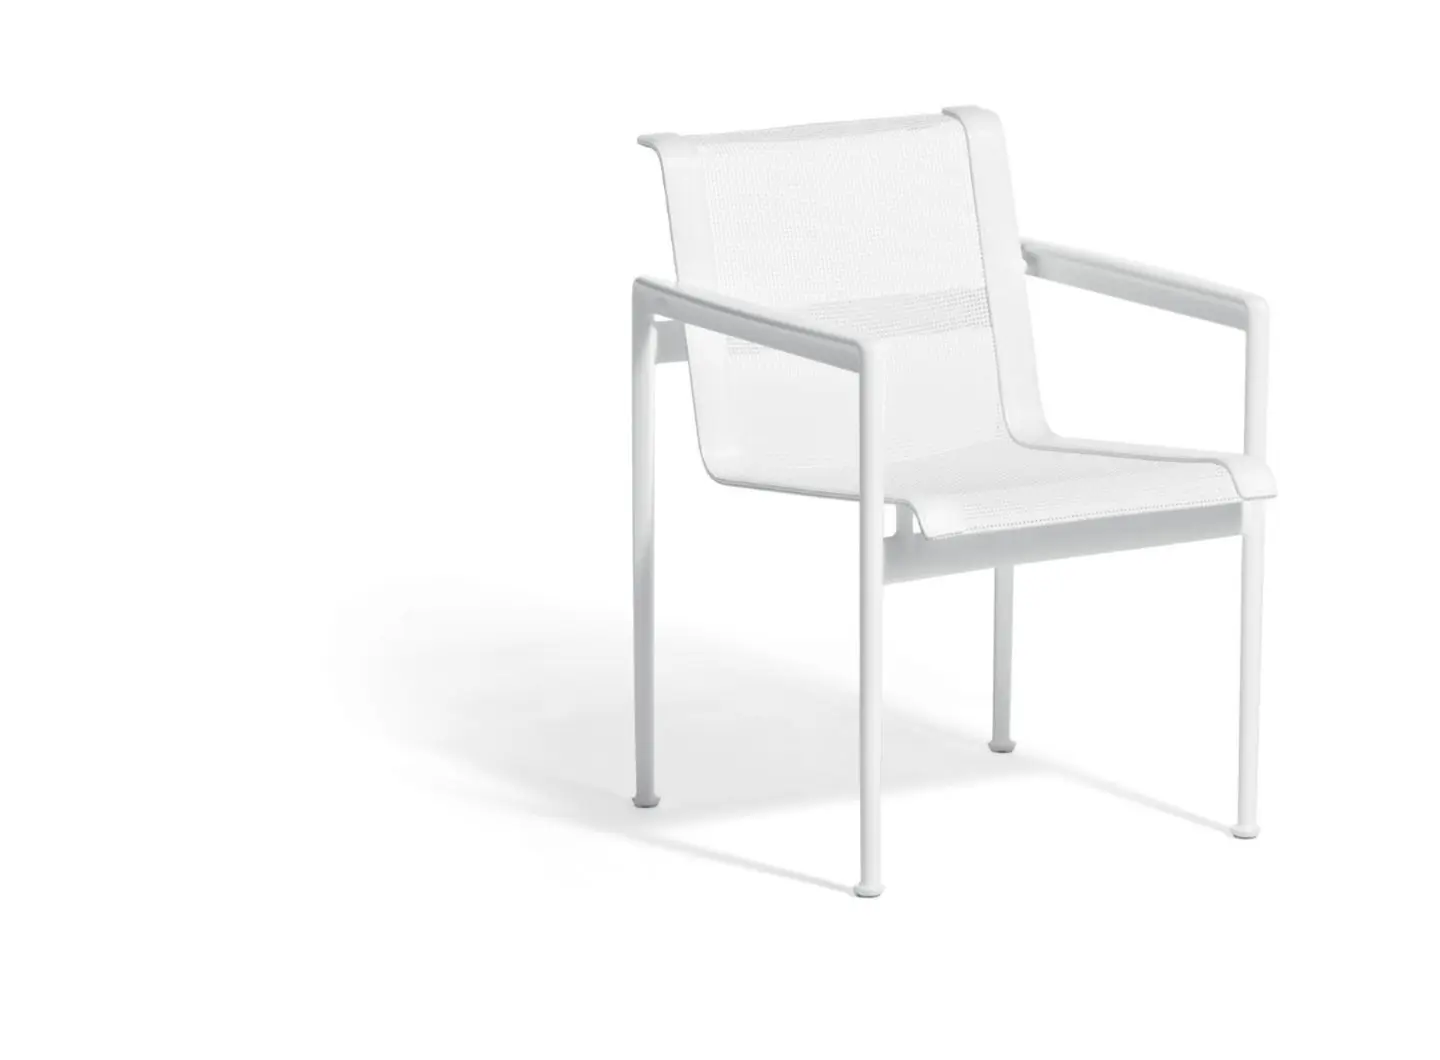 8_Knoll_1966 Dining Chair by Richard Schultz